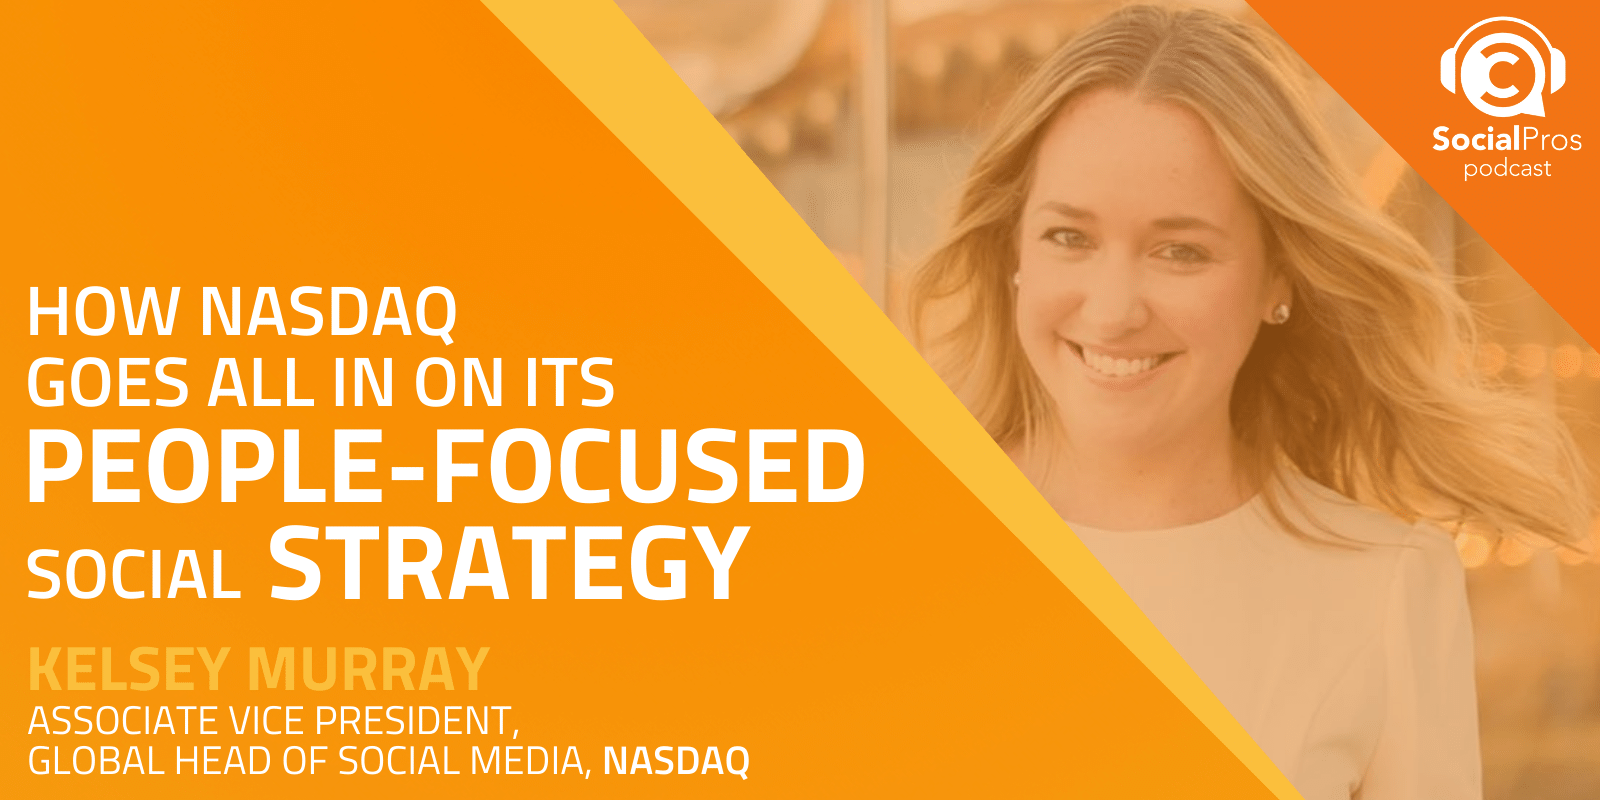 How Nasdaq Goes All in on Its People-Focused Social Strategy